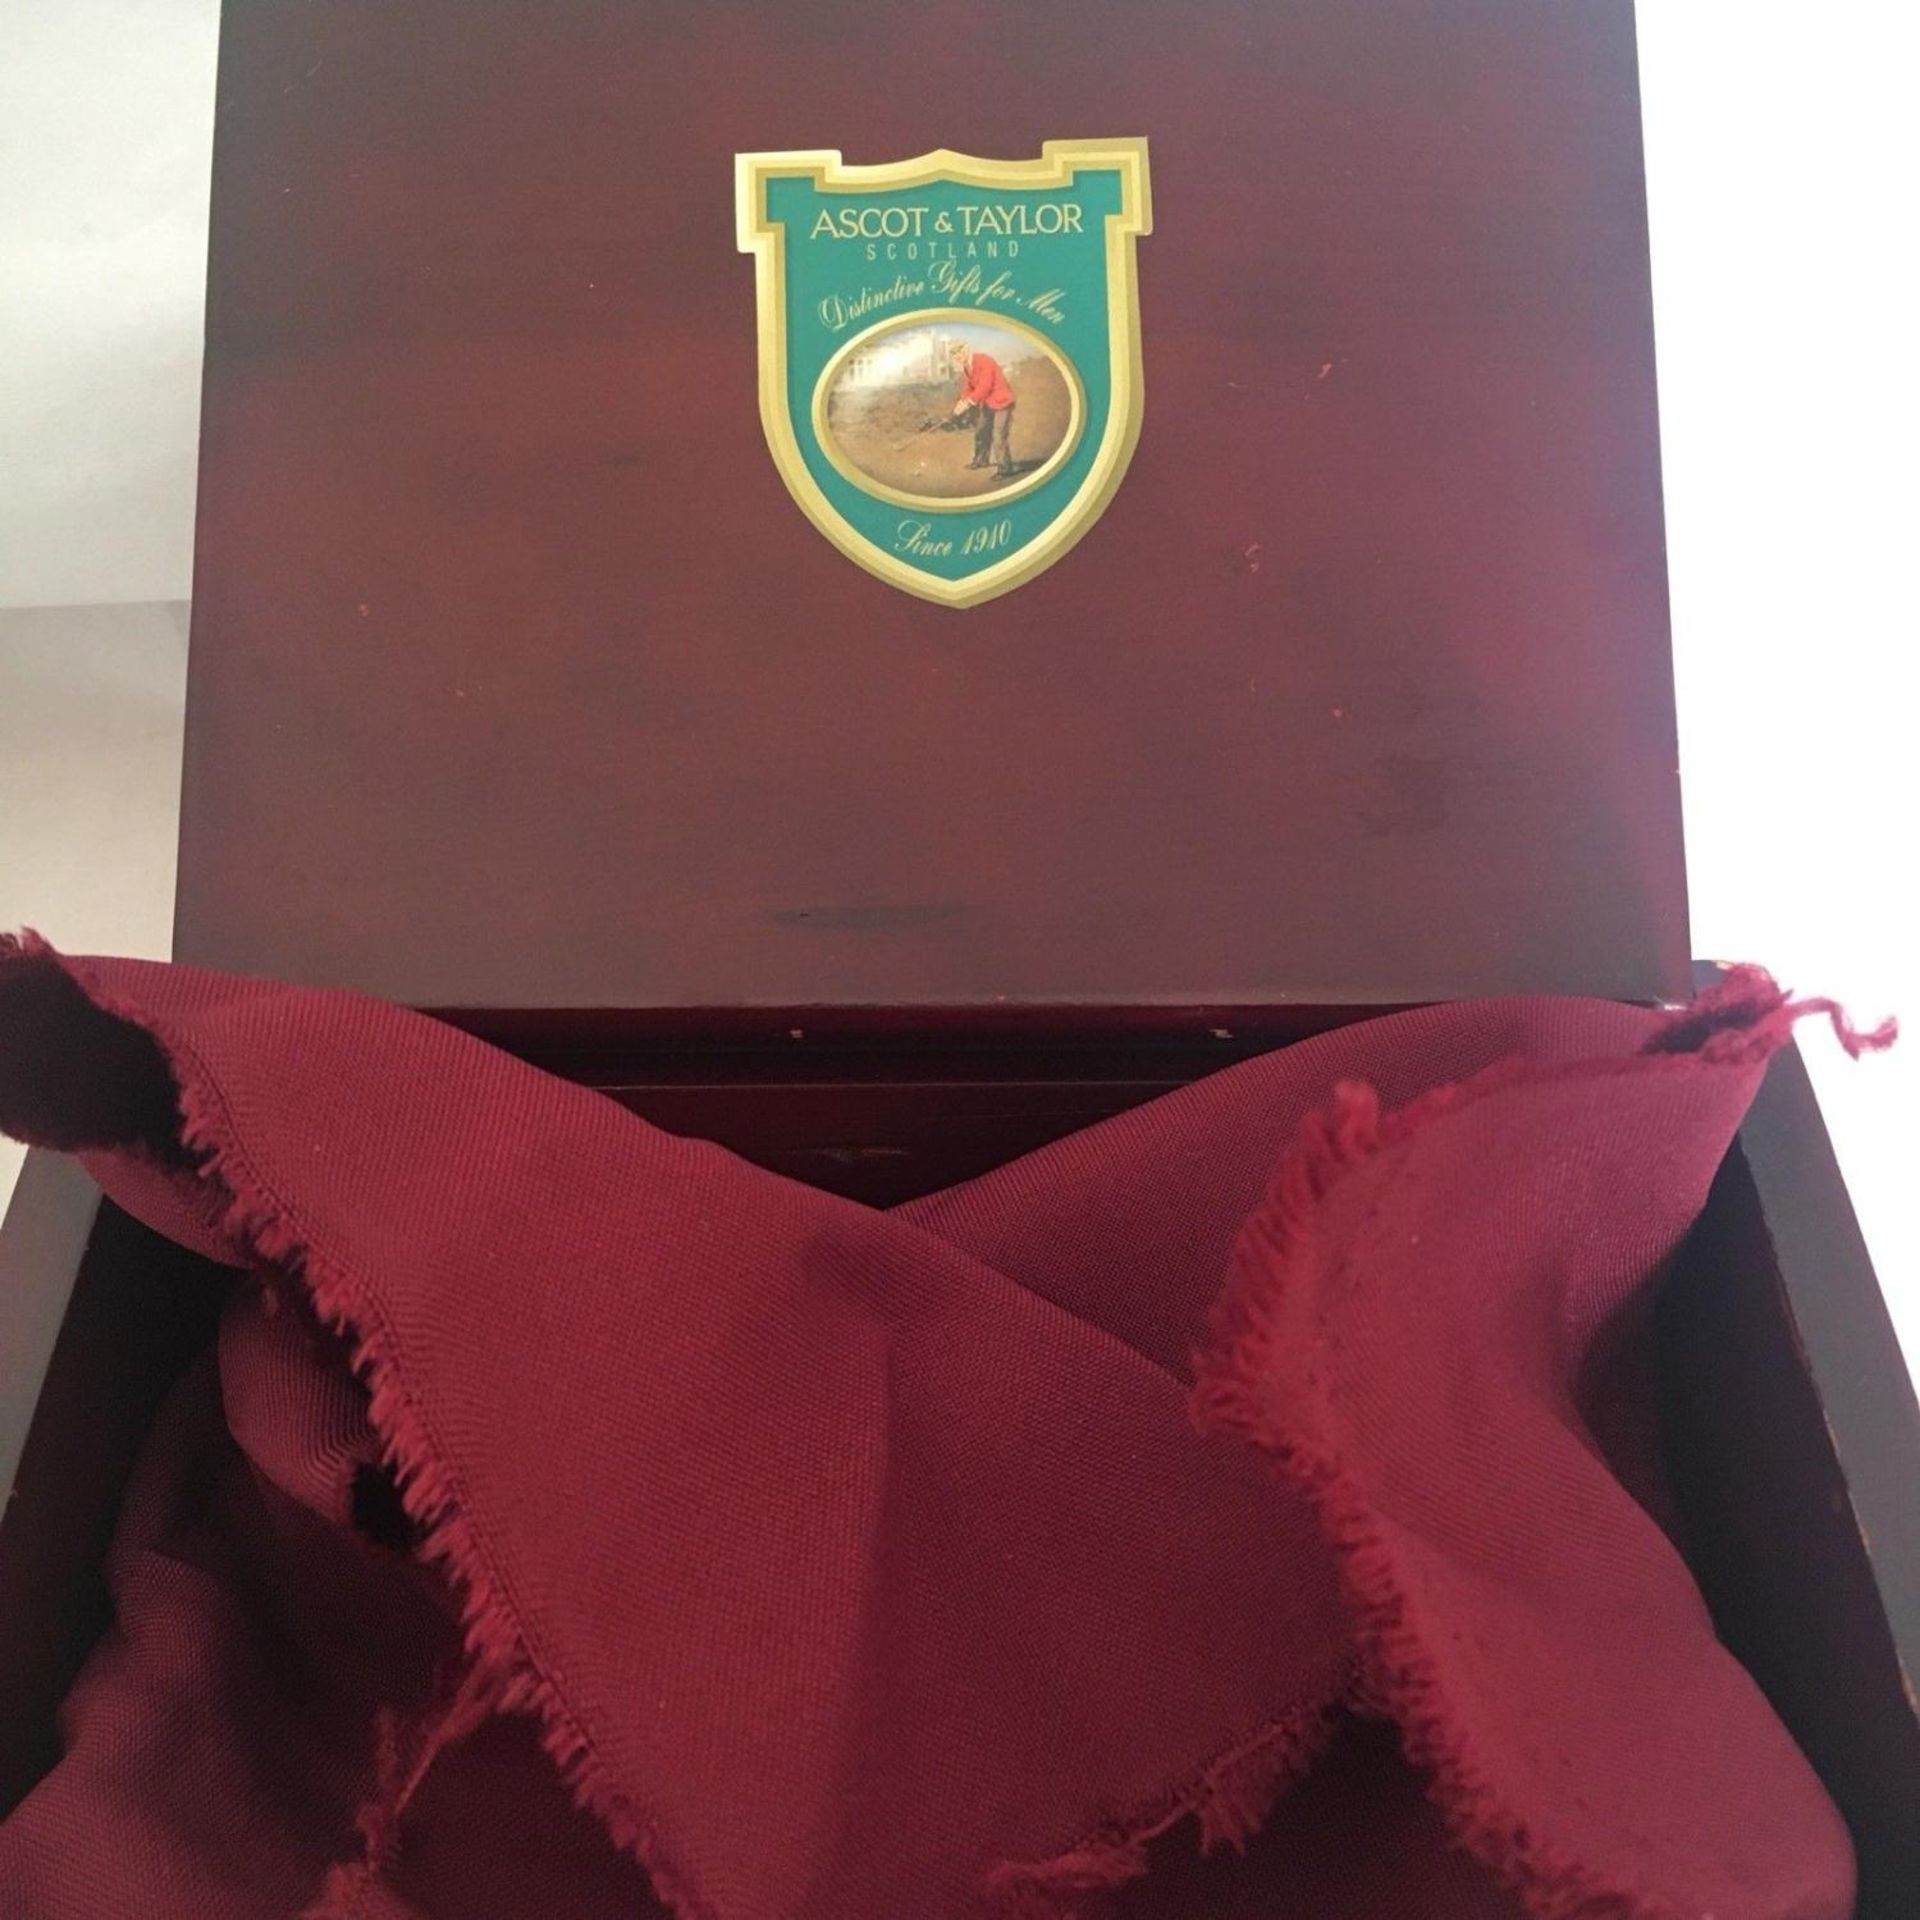 Ascot & Taylor St Andrew's Golf Ball Christmas Ornaments Set of 5 in Wooden Box - Image 3 of 4